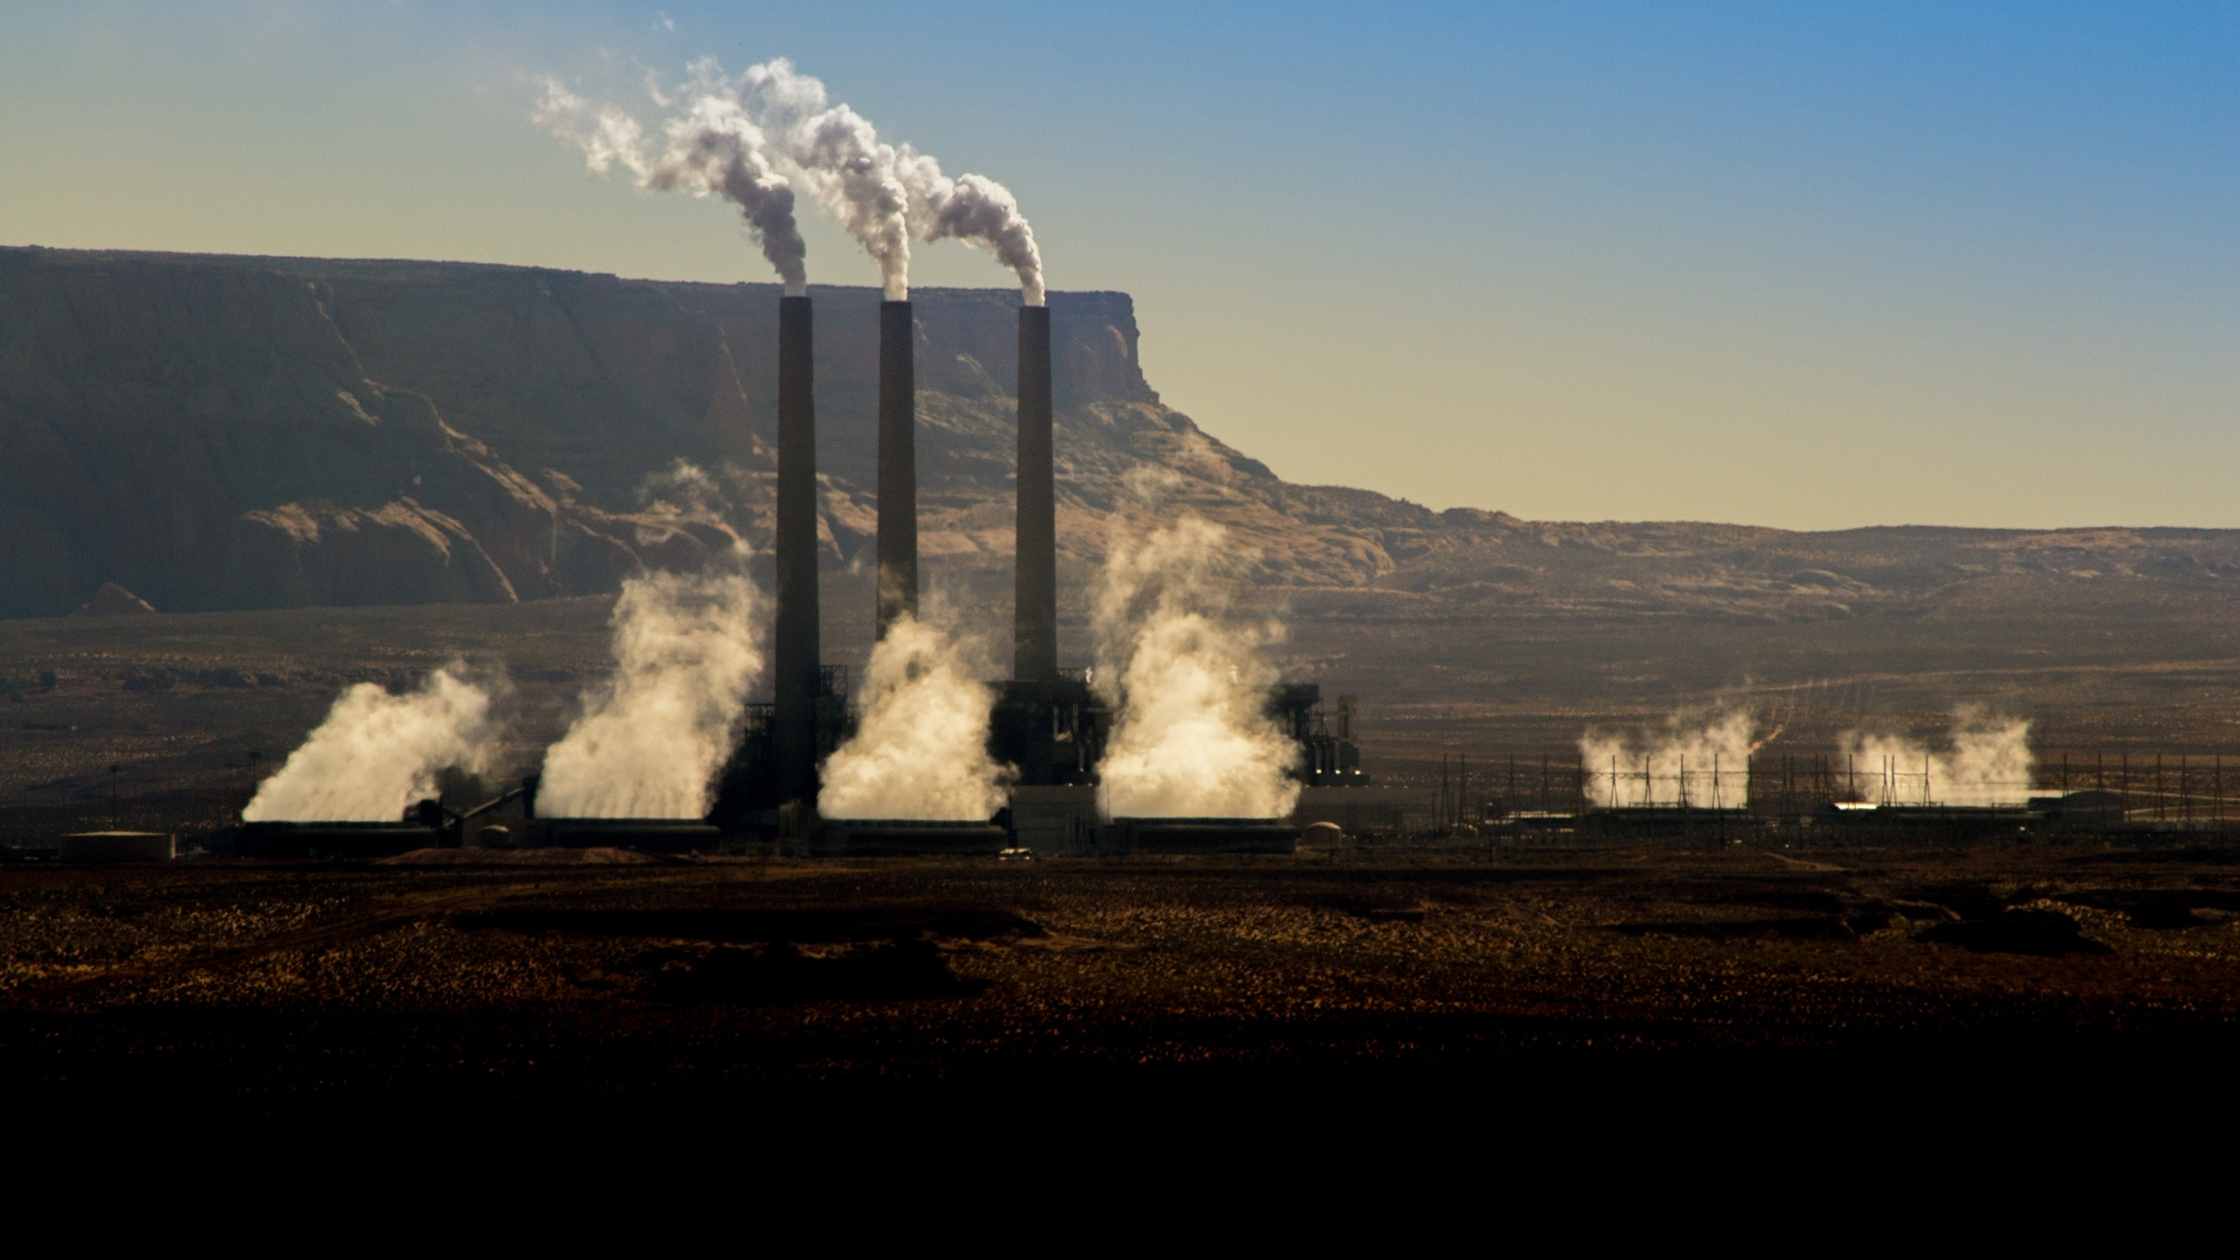 plastic-free - Image of stacks with carbon coming out of them